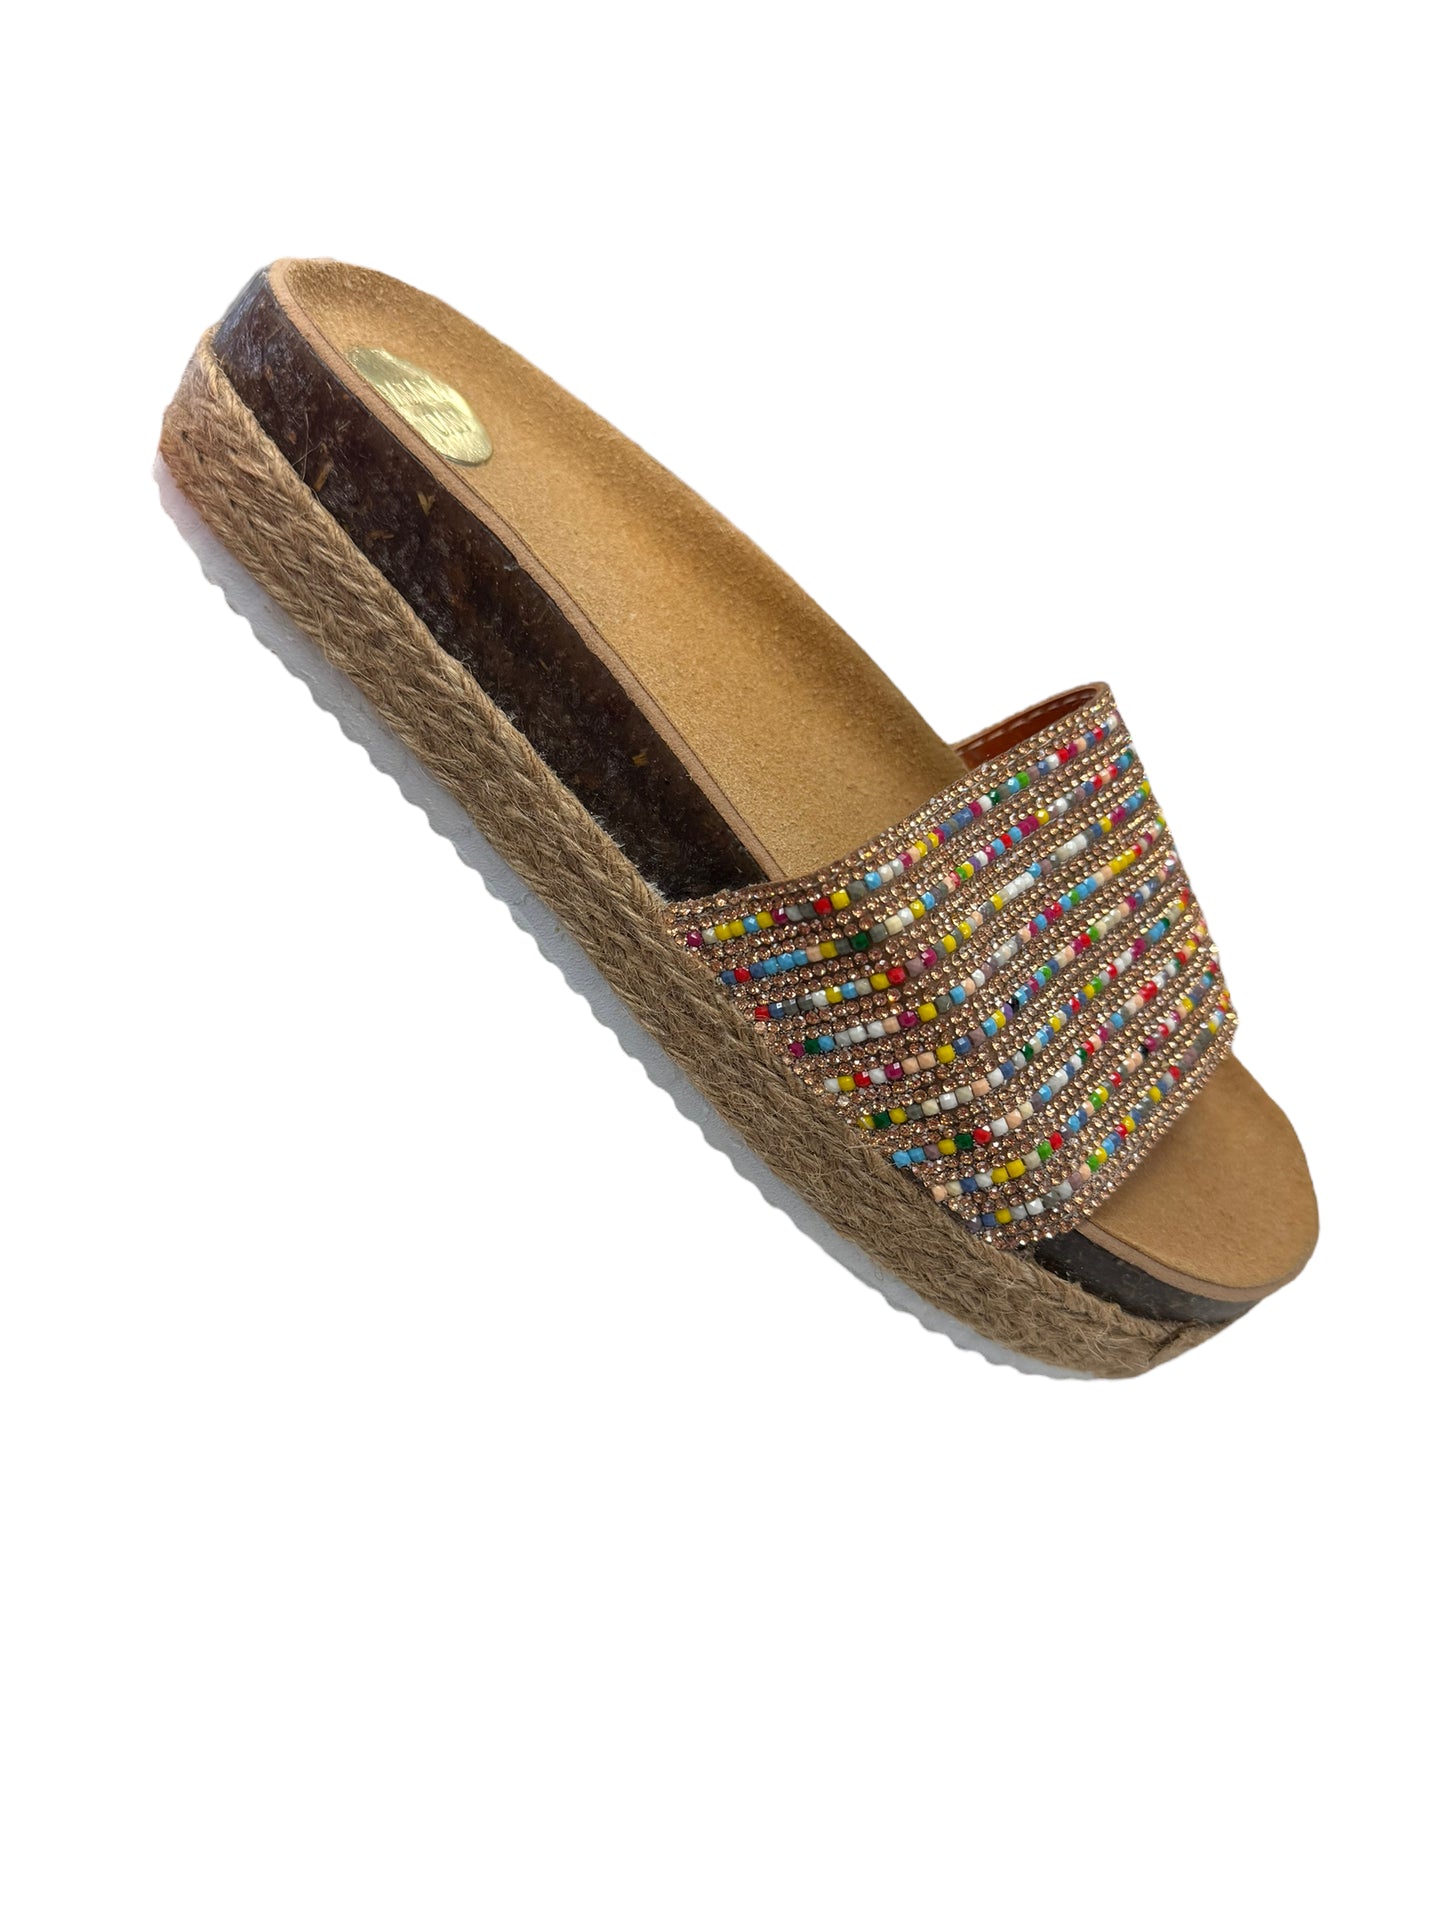 Sandals Flats By Cmc  Size: 7.5